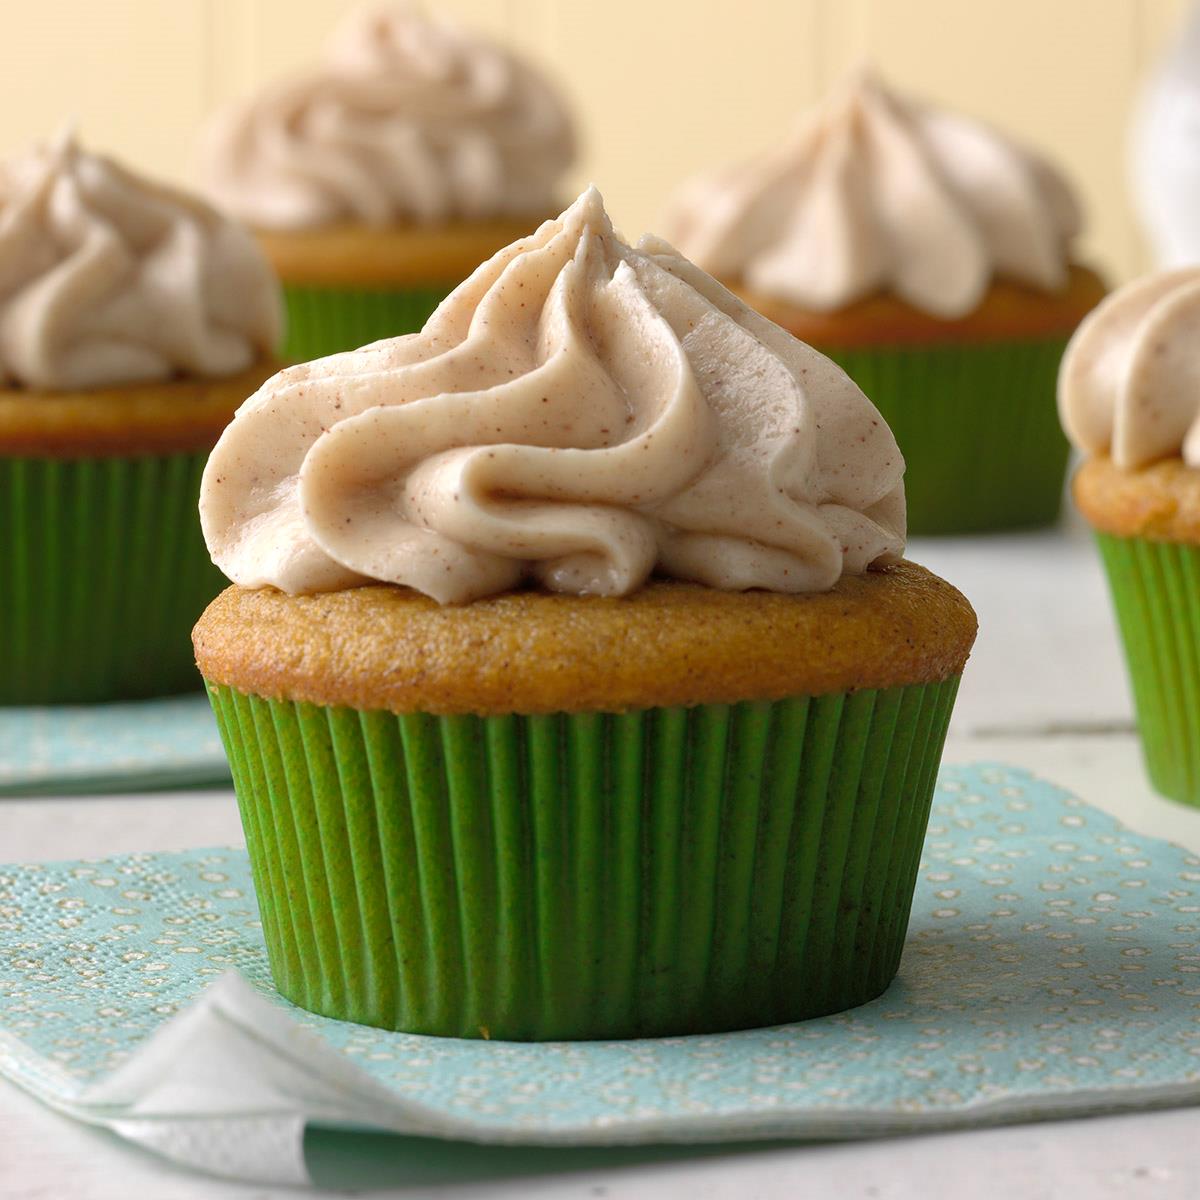 Pumpkin Spice Cupcakes with Cream Cheese Frosting Recipe | Taste of Home